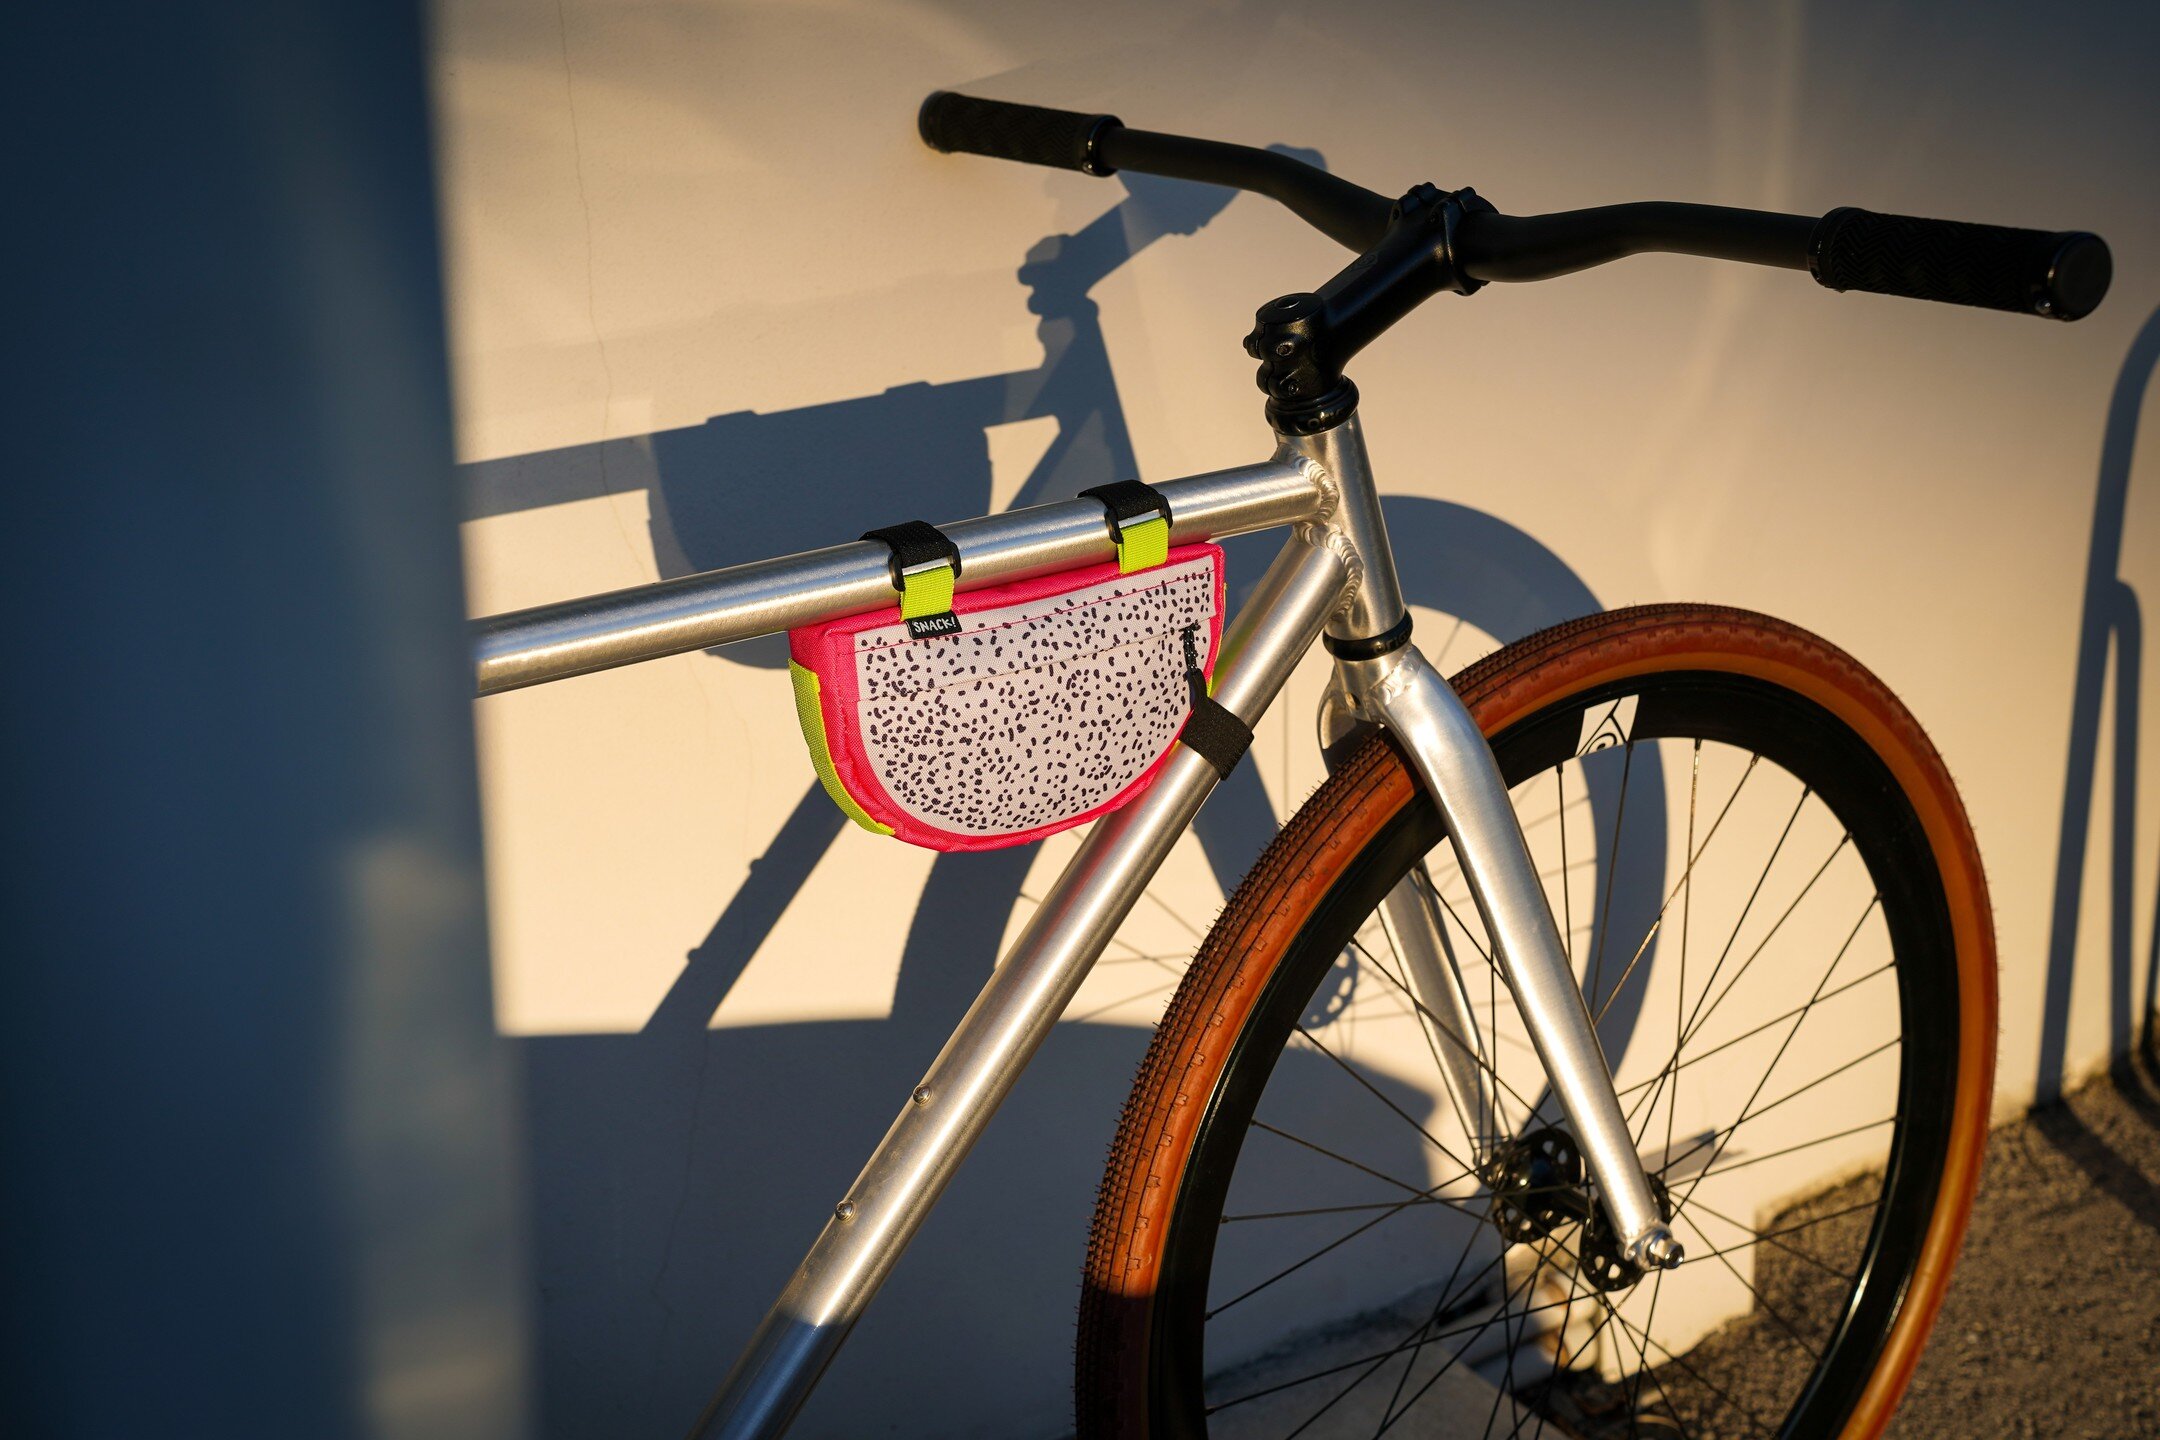 Roll into the weekend with a pop of color and a burst of tropical delight! The dragon fruit frame bag is feeling fresh and ready for your weekend miles.

 #SnackSocialClub #SnackBike #bikesnacks #ridesnacks #snackbags #snackbikebags #framebag #bicycl